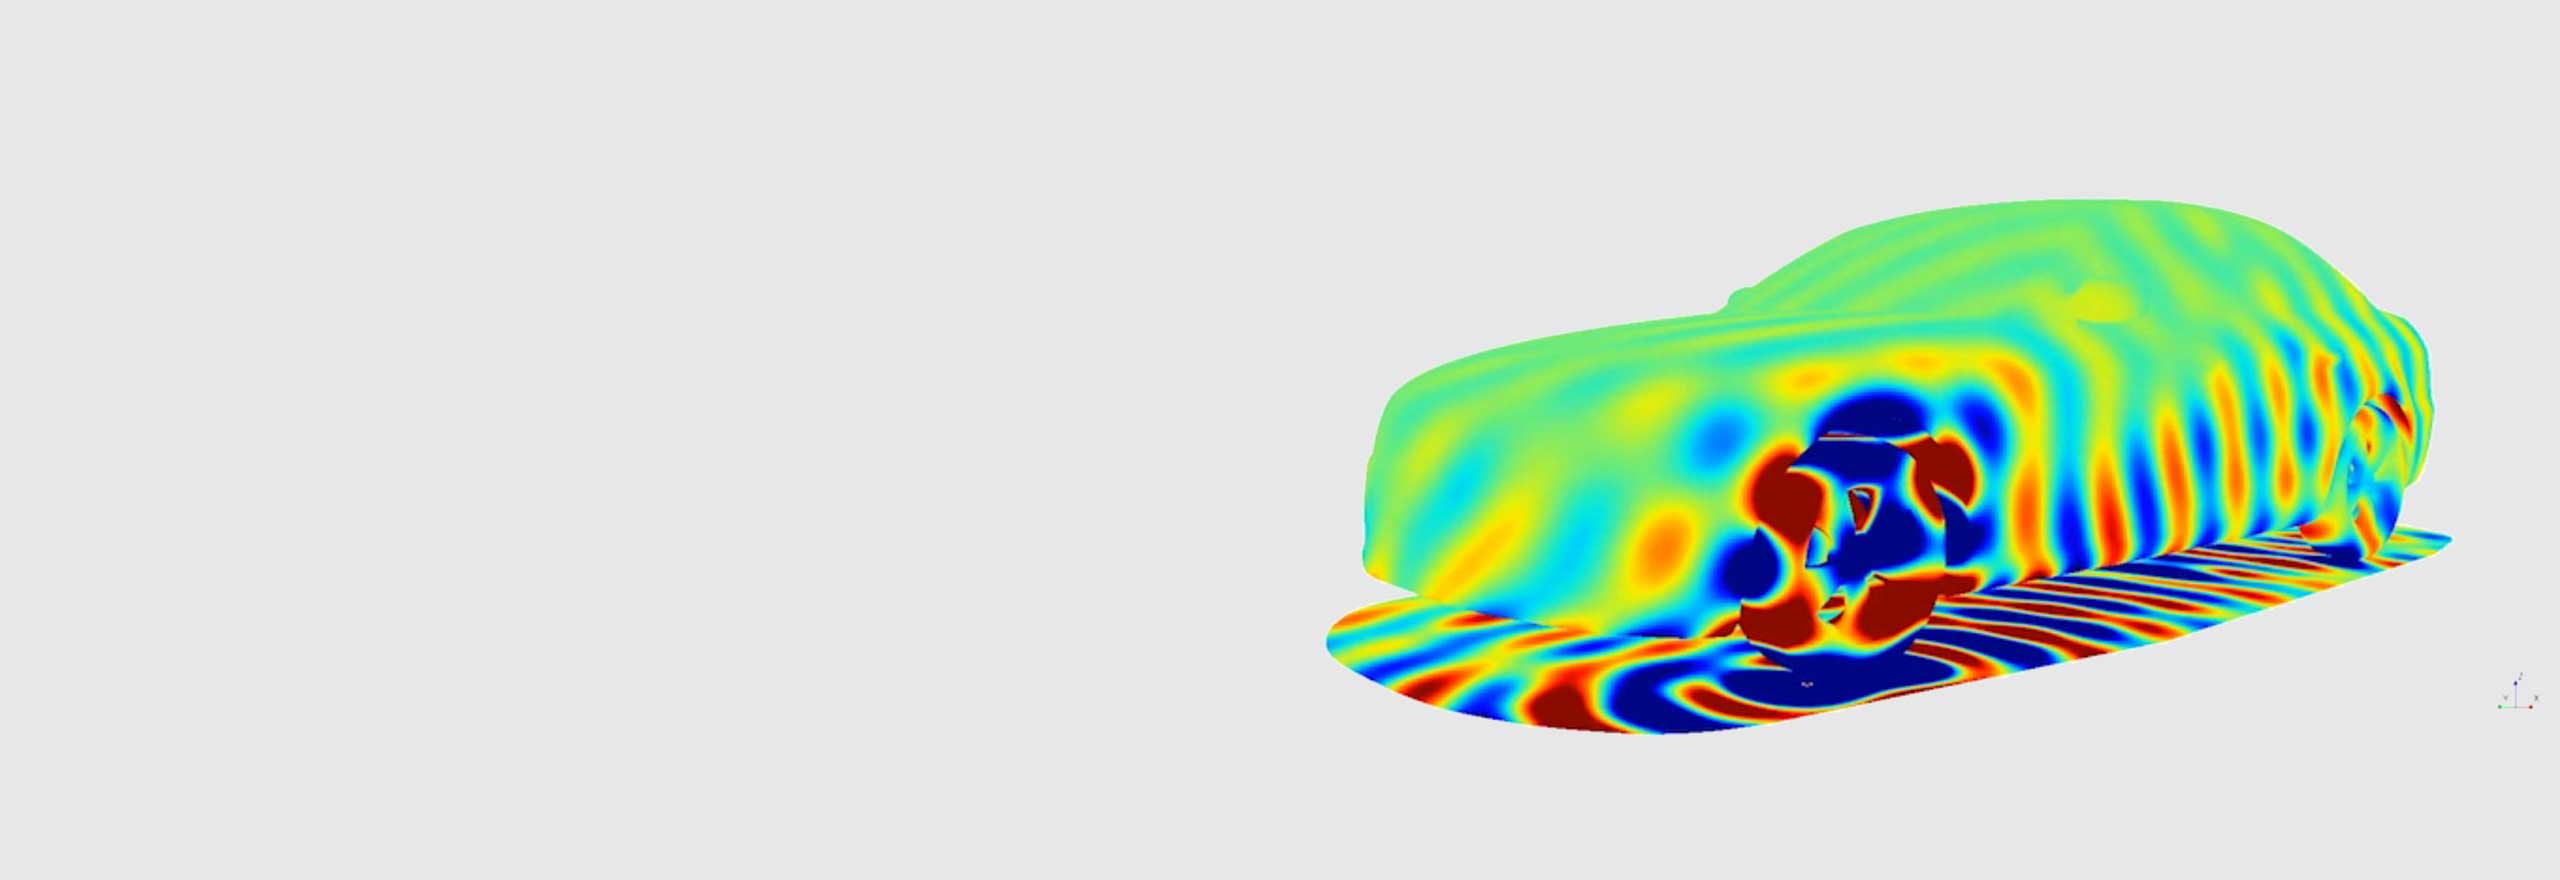 Pass-by noise simulation of a vehicle using acoustic simulation software 